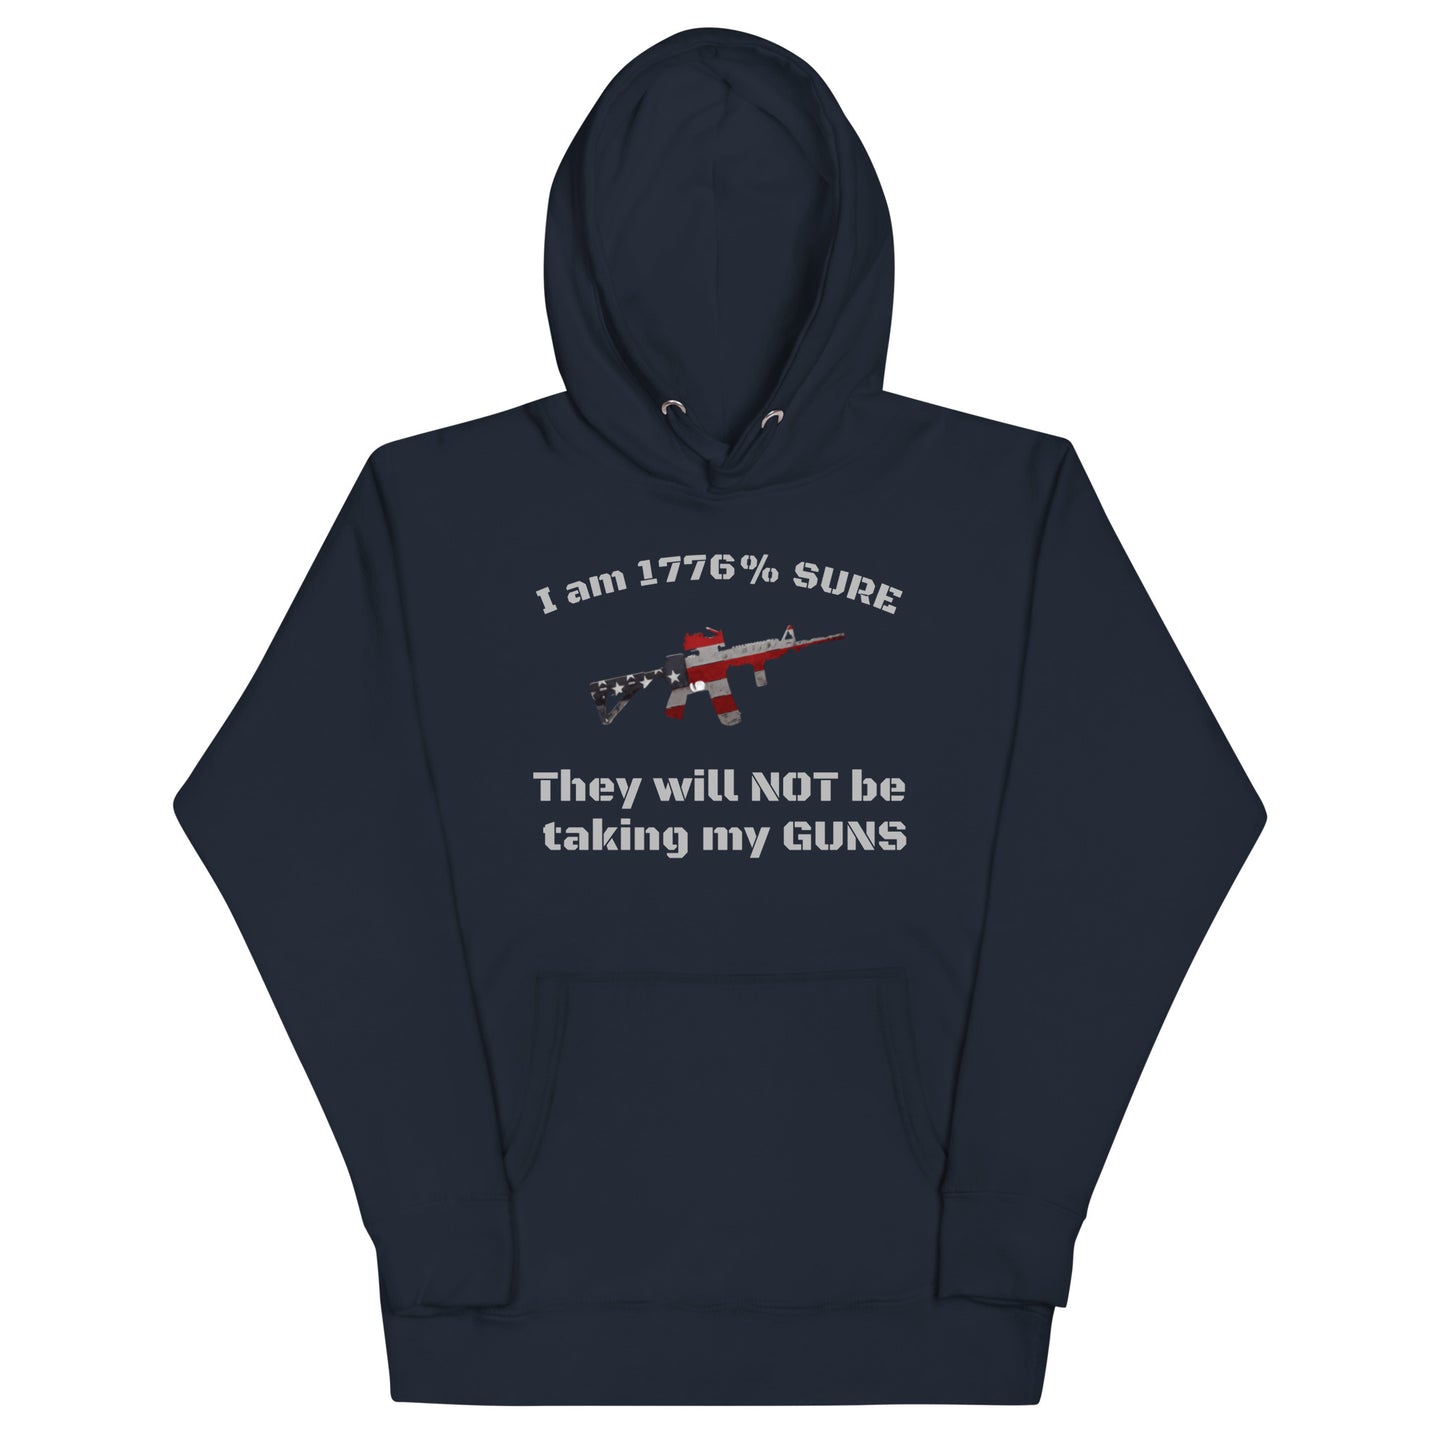 I am 1776% sure they will not be taking my guns Unisex Hoodie (gray lettering)